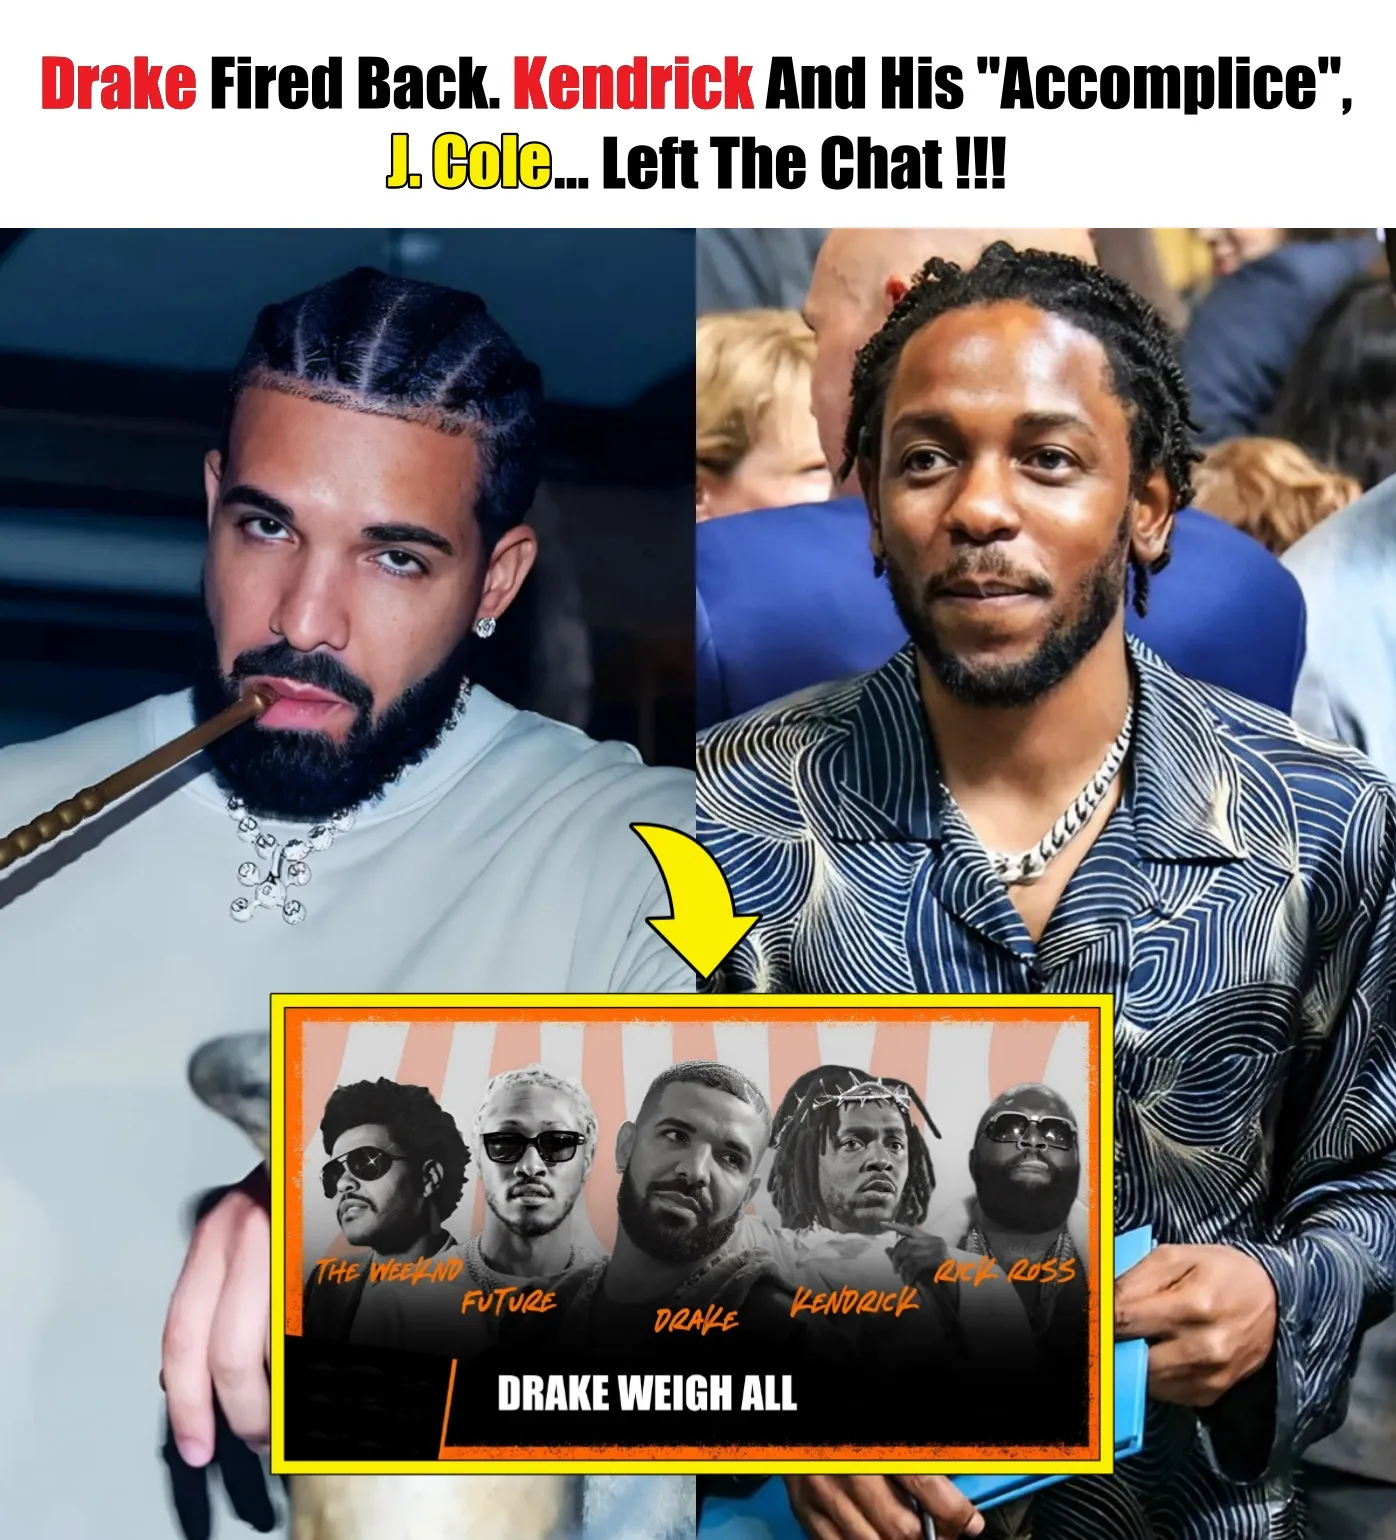 Cover Image for Drake Fired Back. Kendrick And His “Accomplice”, J. Cole… Left The Chat !!!